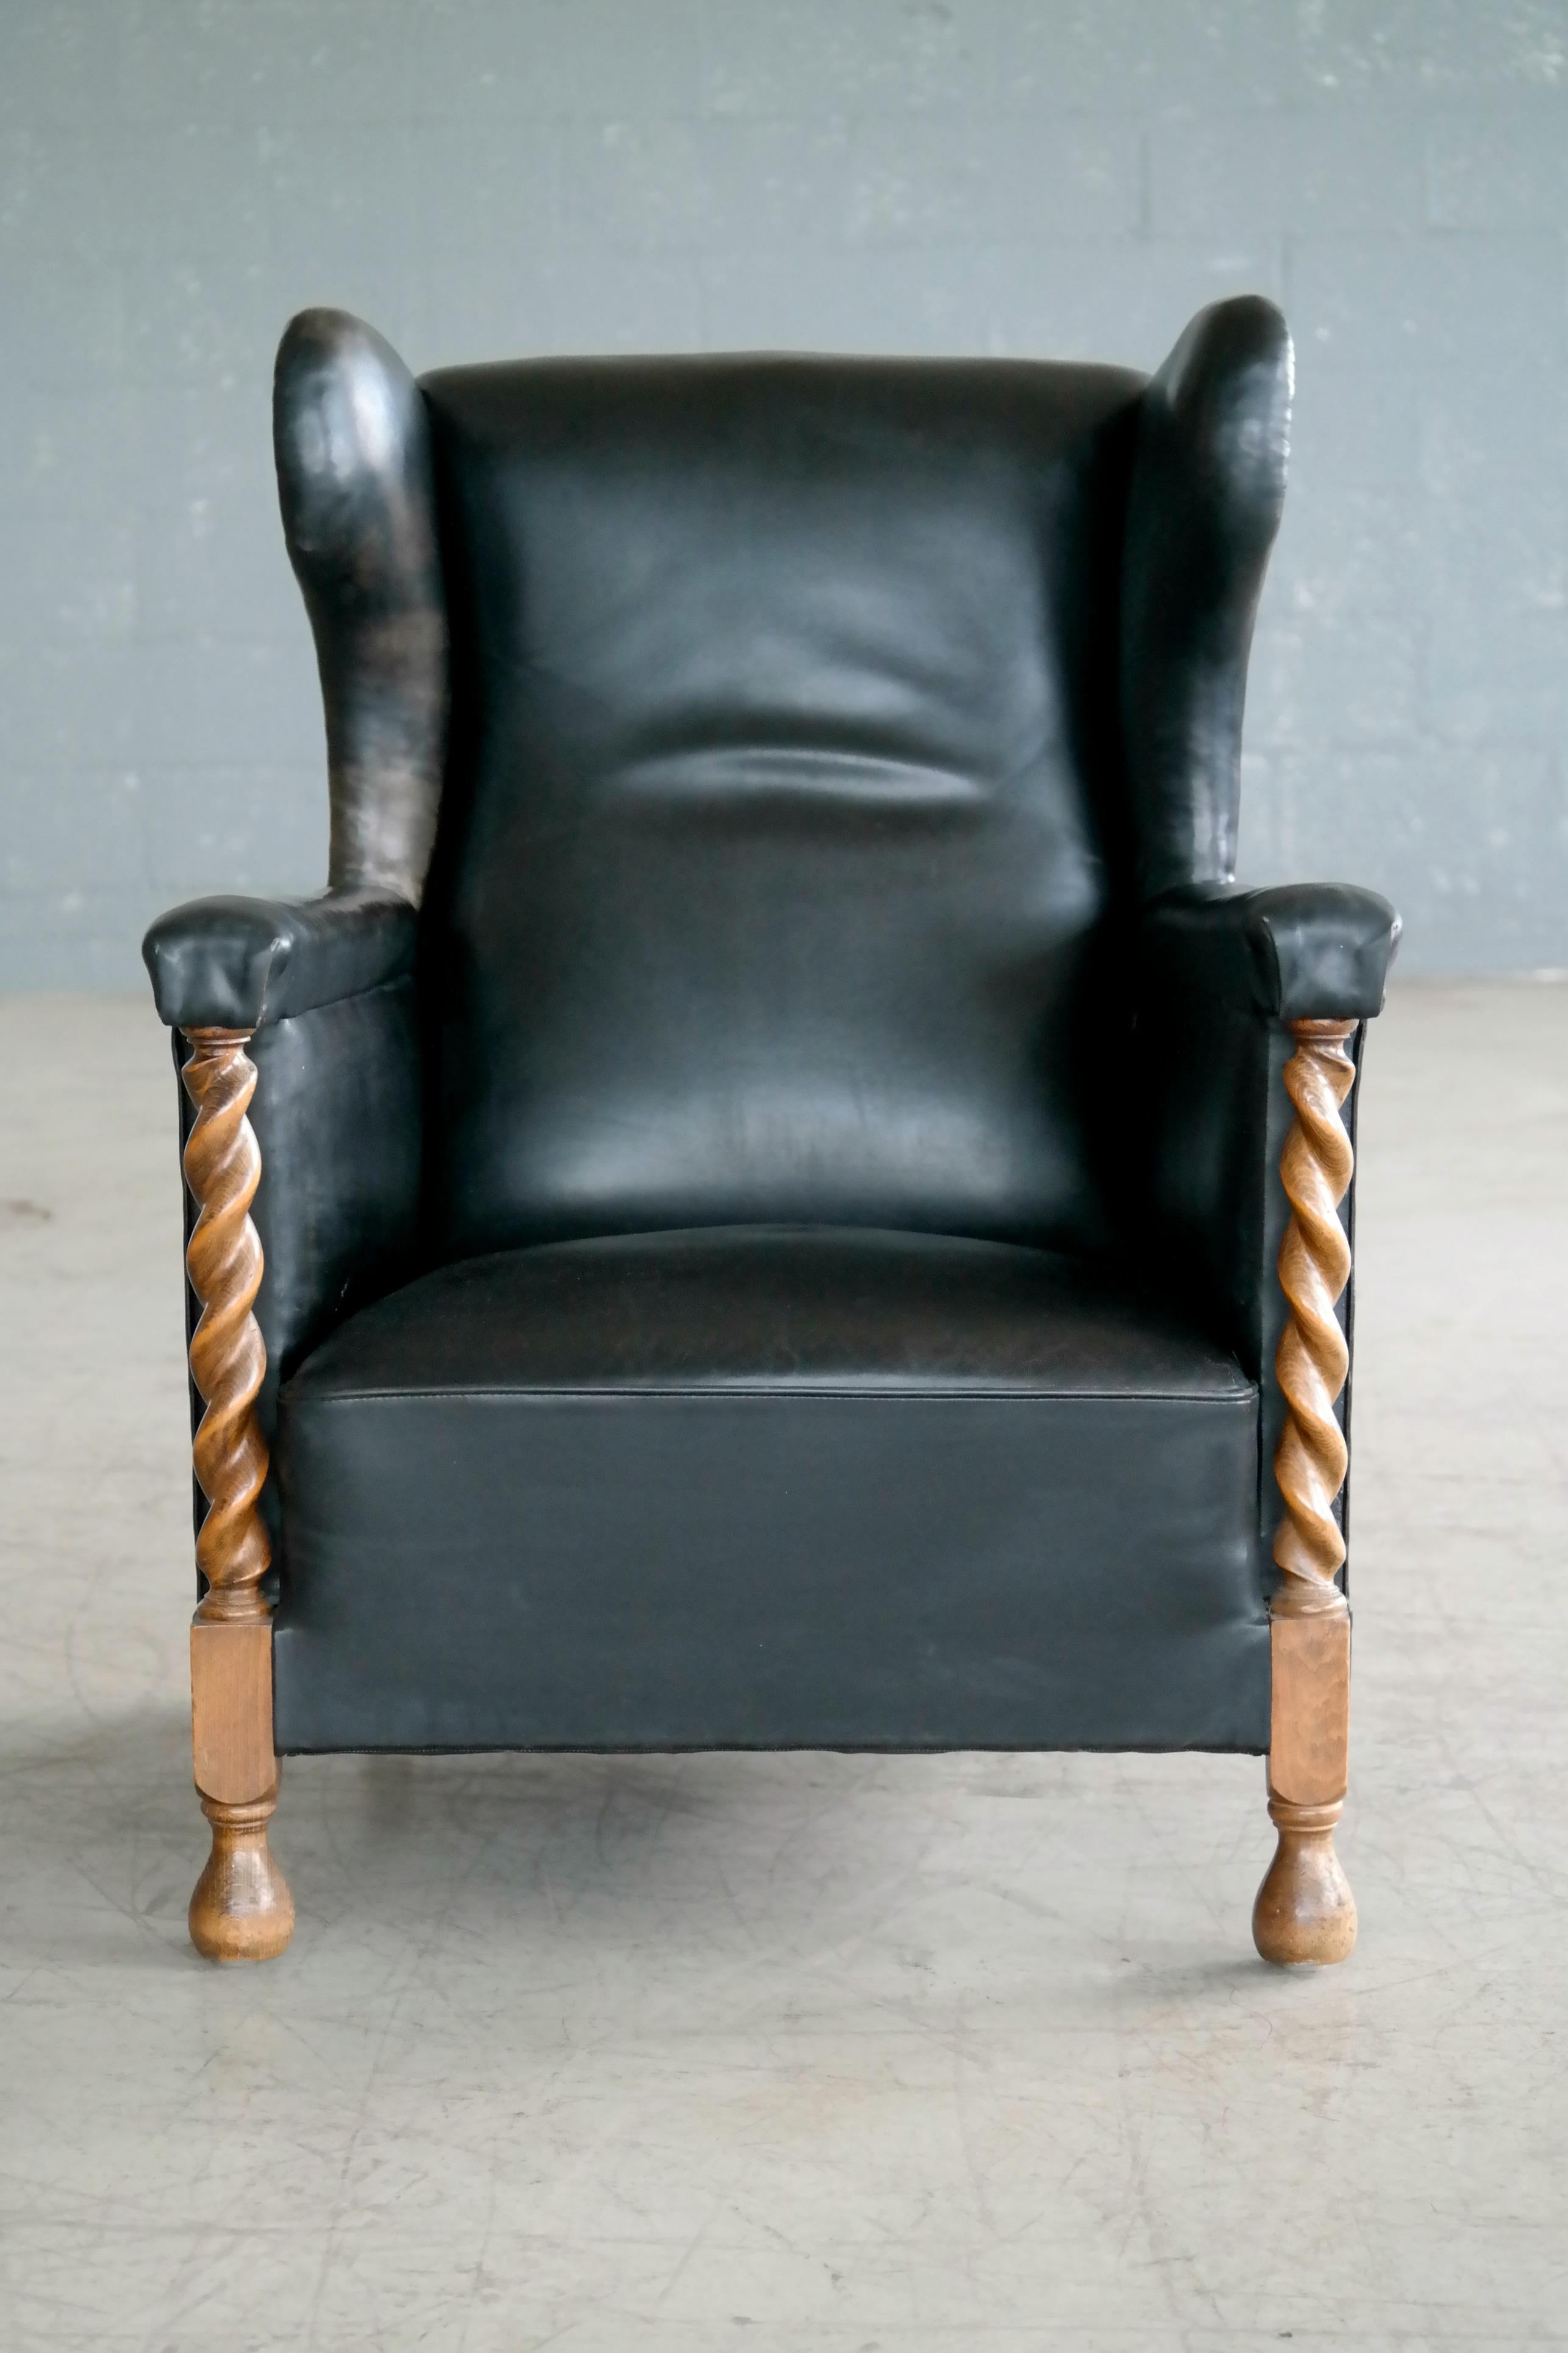 Scandinavian Modern Danish 1930s Large Scale Club or Wingback Chair in Black Leather and Carved Oak